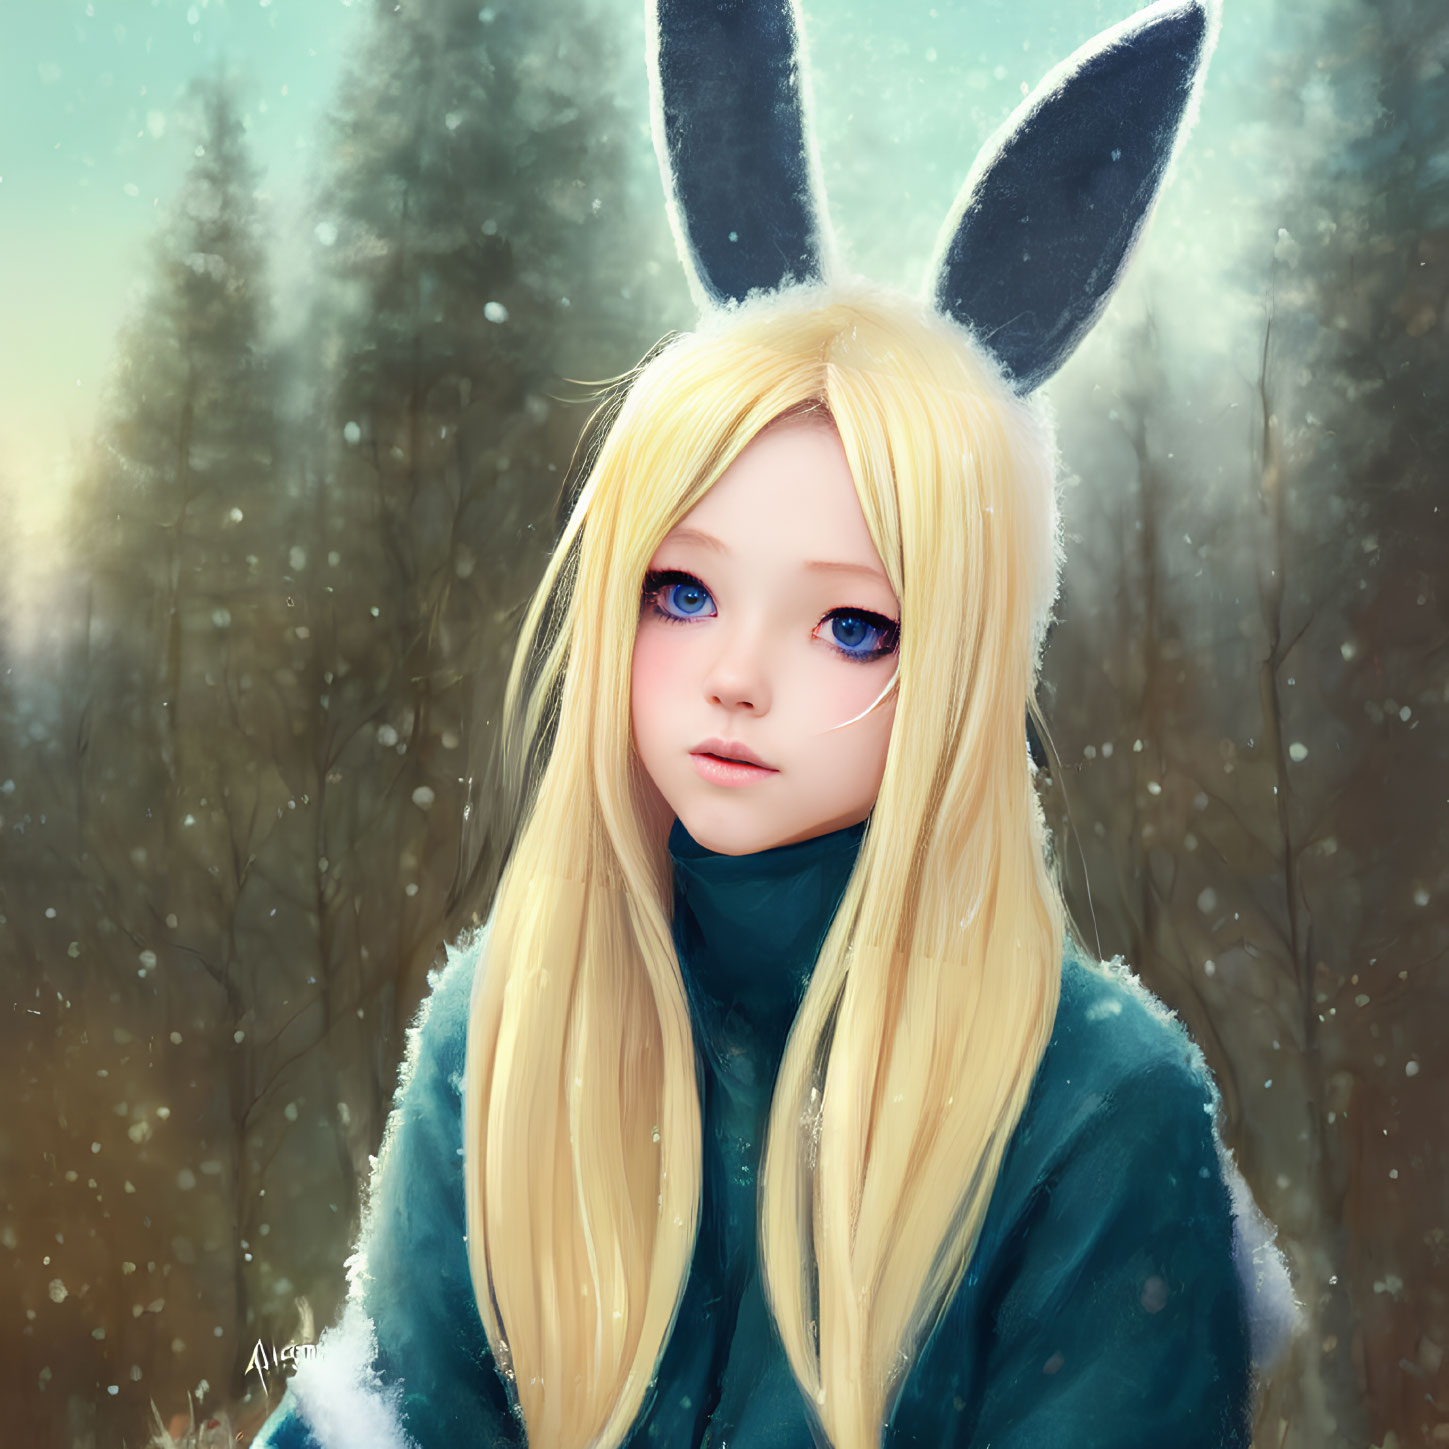 Blonde Girl in Rabbit Ears and Green Coat in Snowy Forest